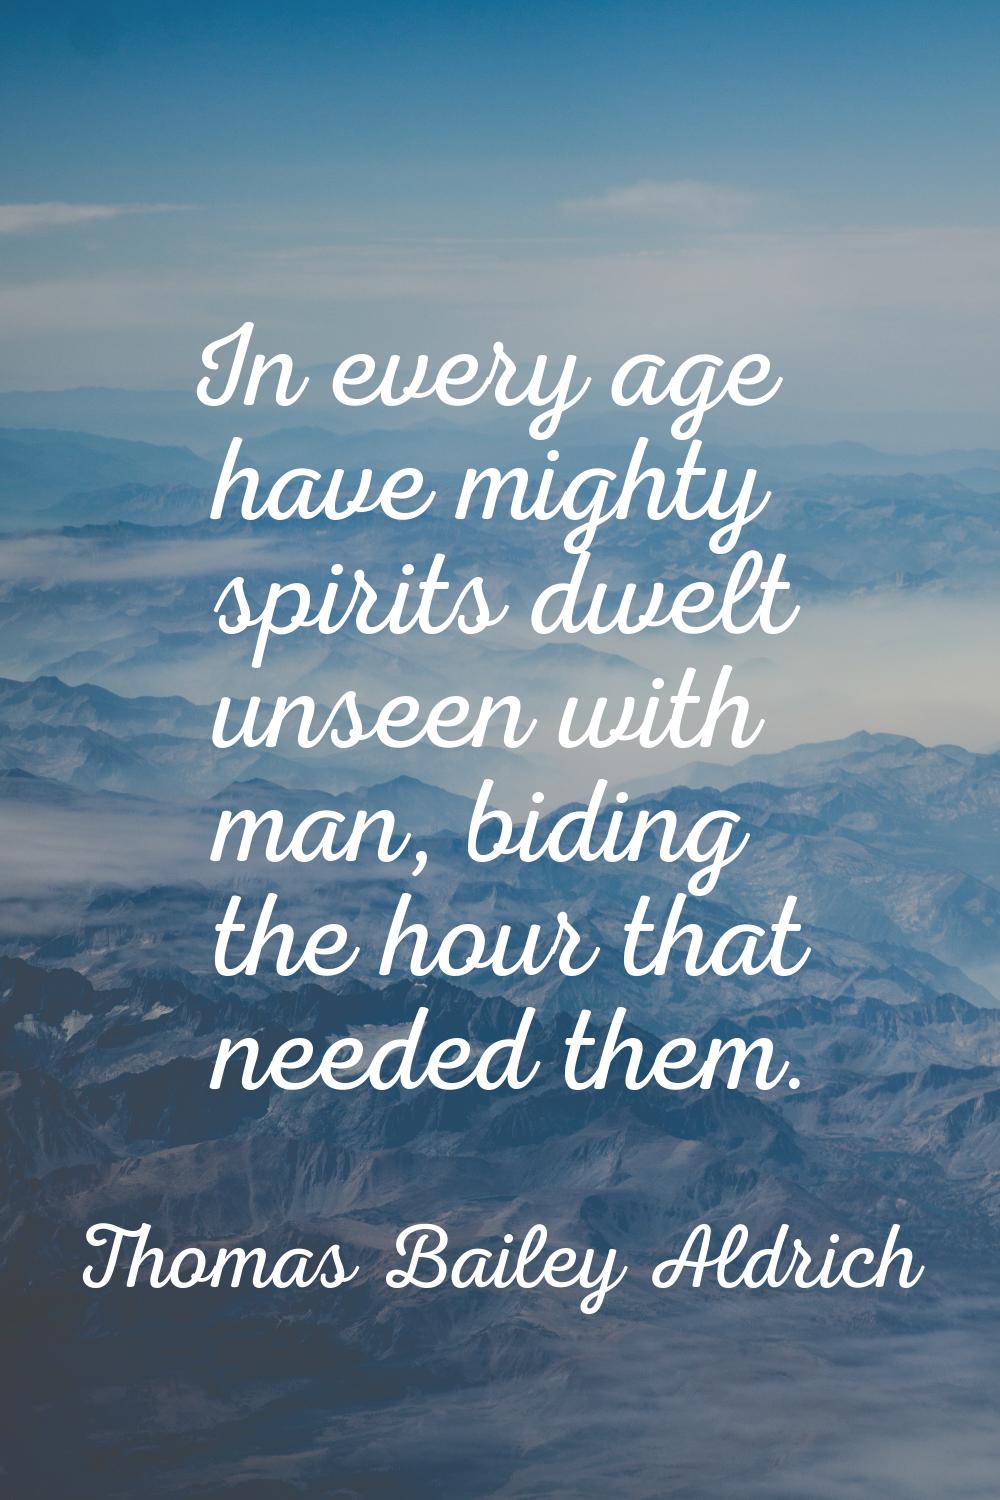 In every age have mighty spirits dwelt unseen with man, biding the hour that needed them.